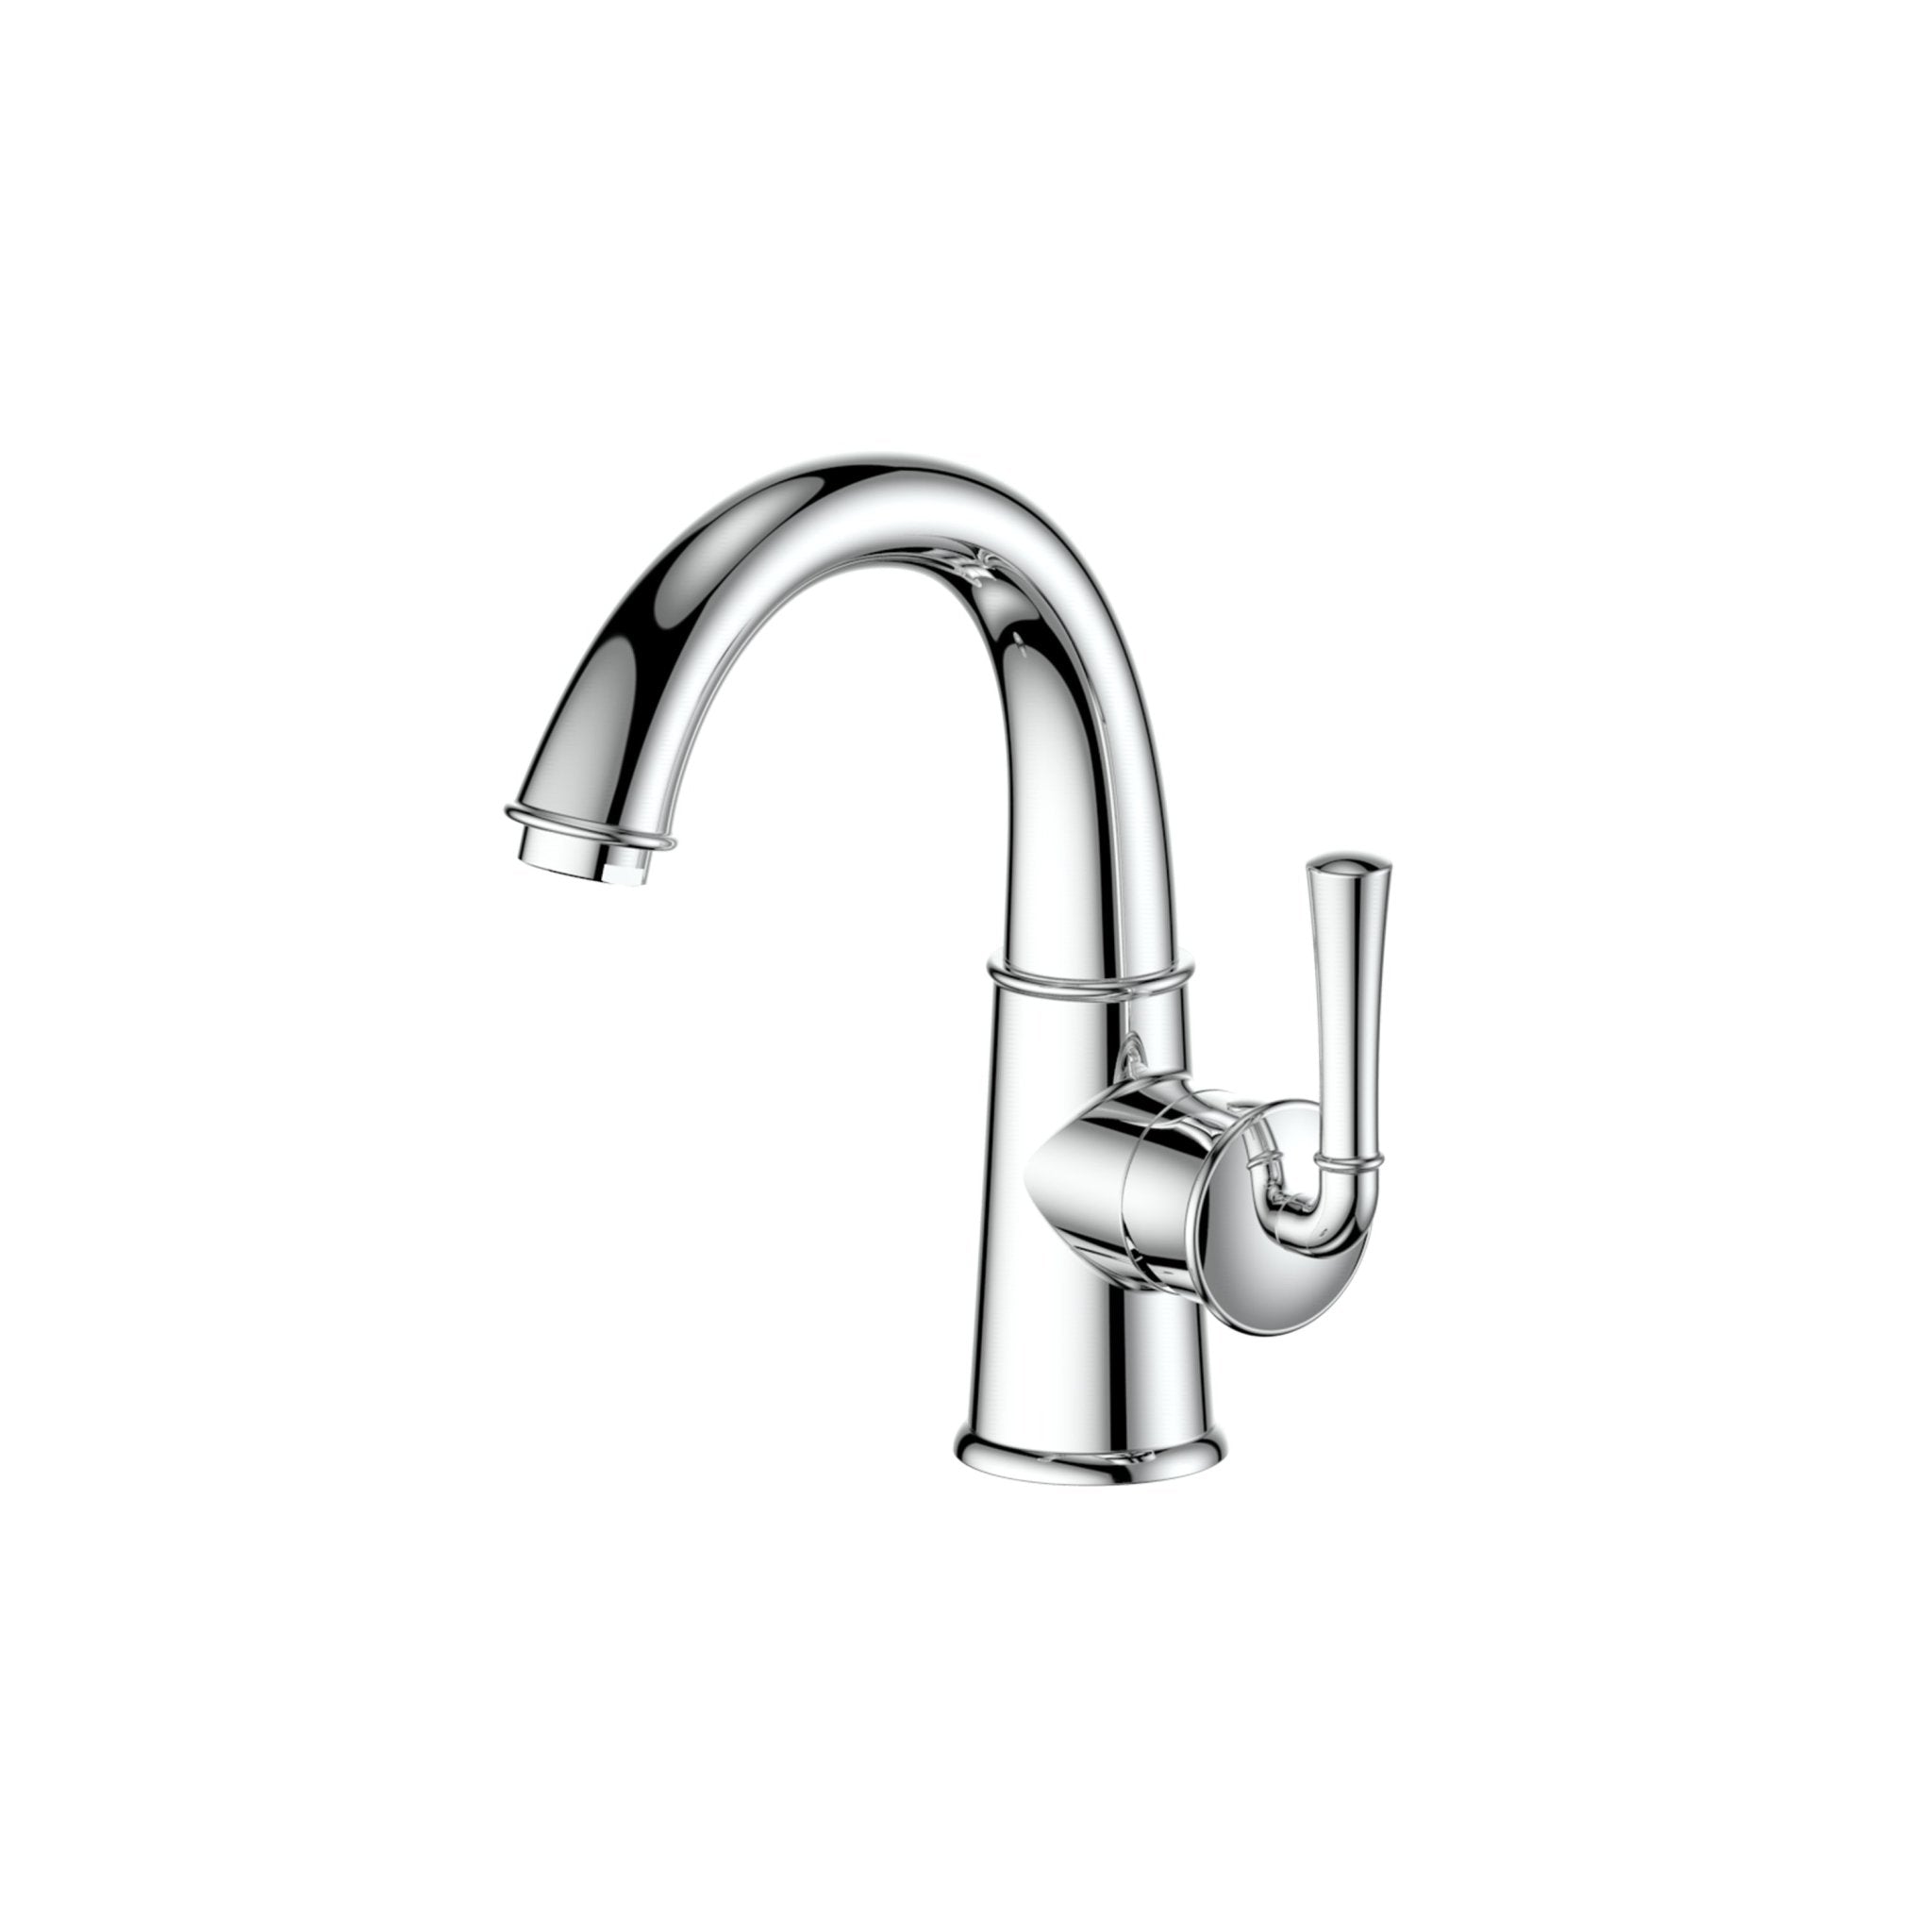 ZLINE Olympic Valley Bath Faucet in Chrome, OLV-BF-CH